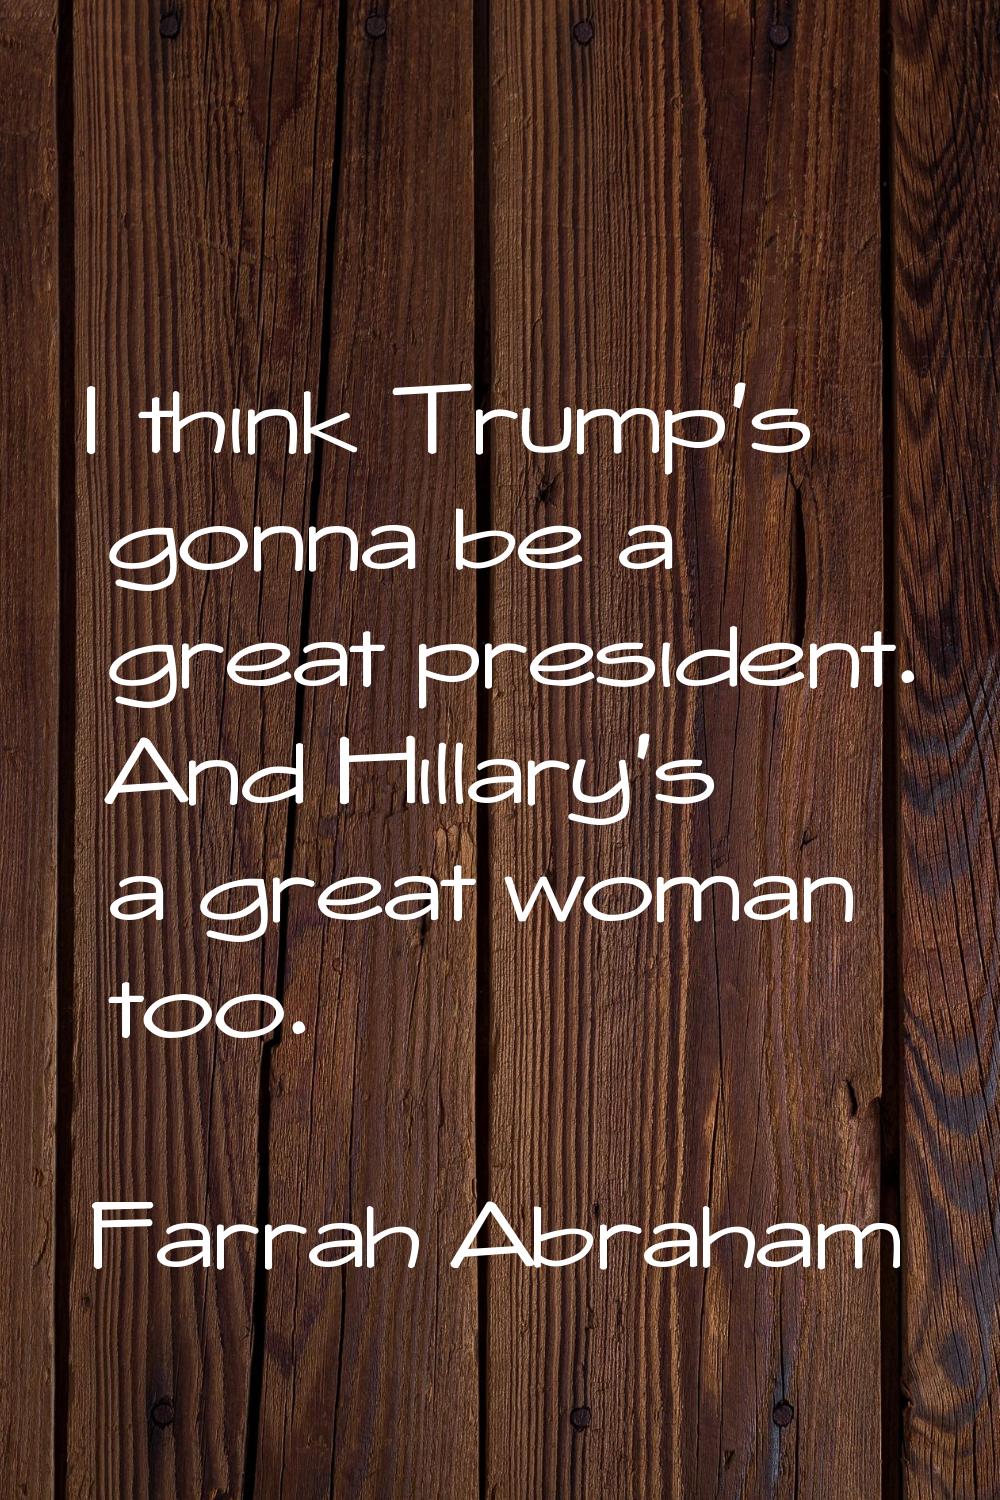 I think Trump's gonna be a great president. And Hillary's a great woman too.